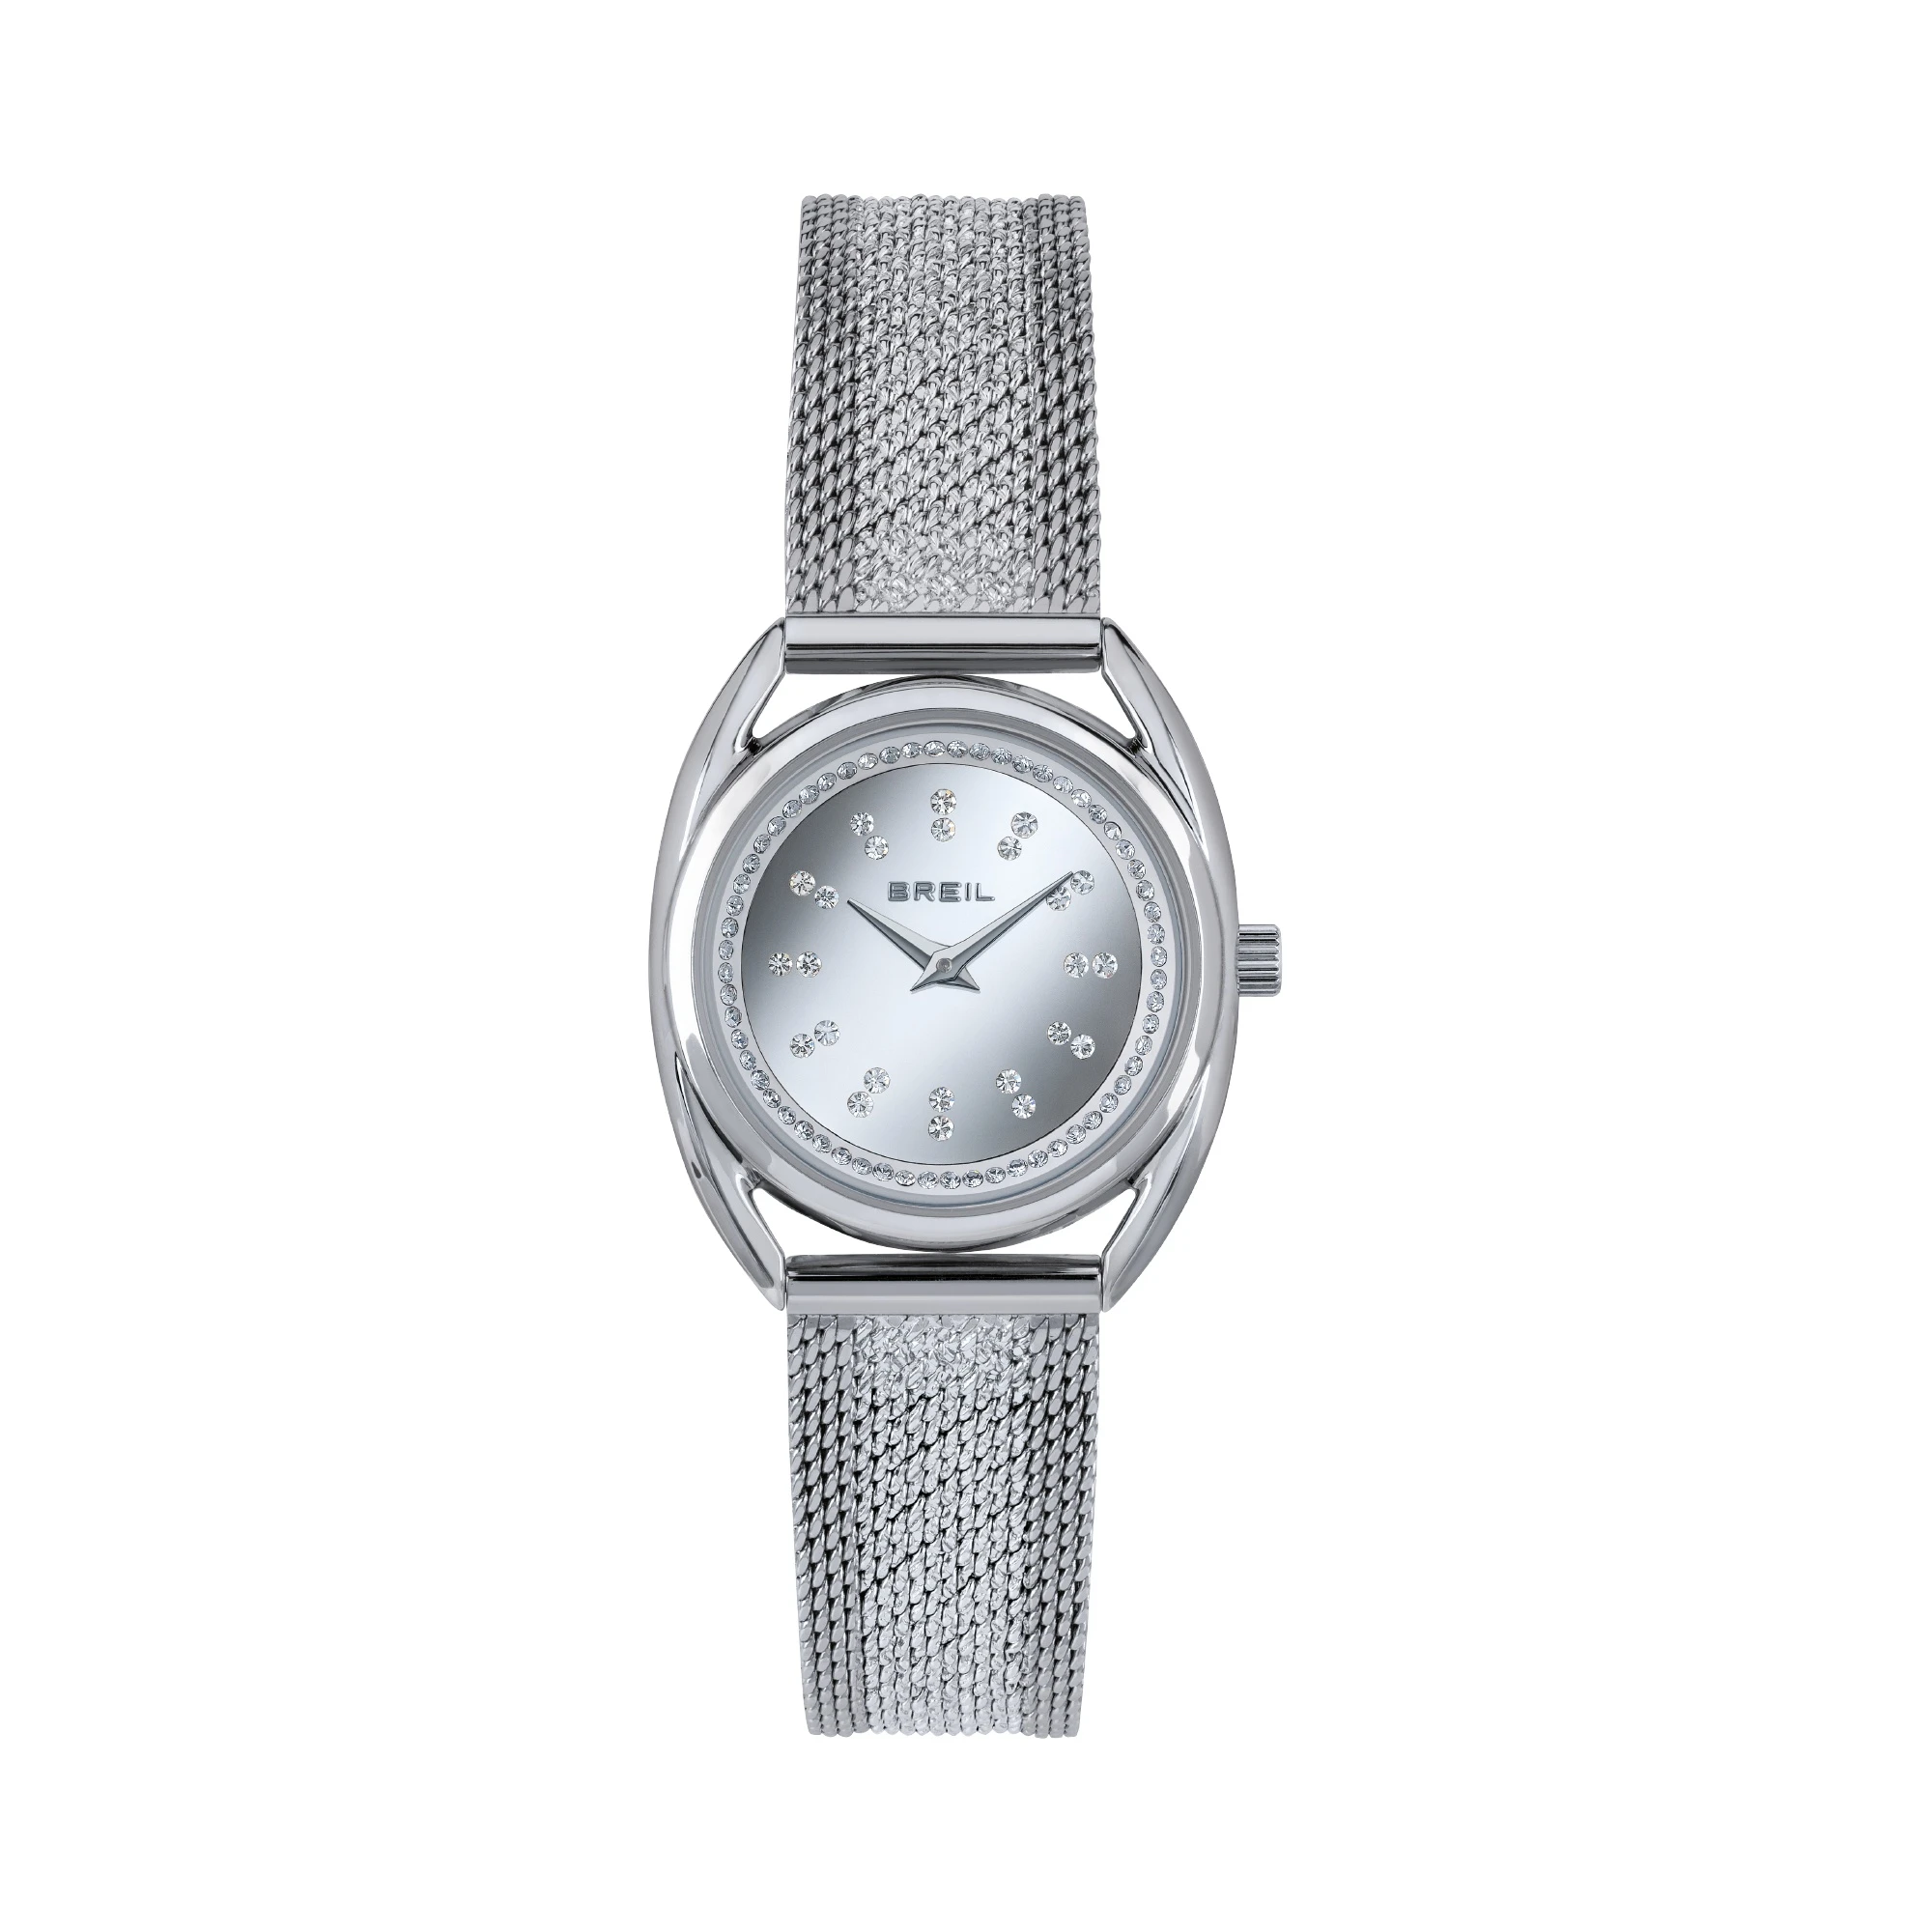 PETIT CHARME - TIME ONLY LADY 28 MM - 1 - TW1894 | Breil